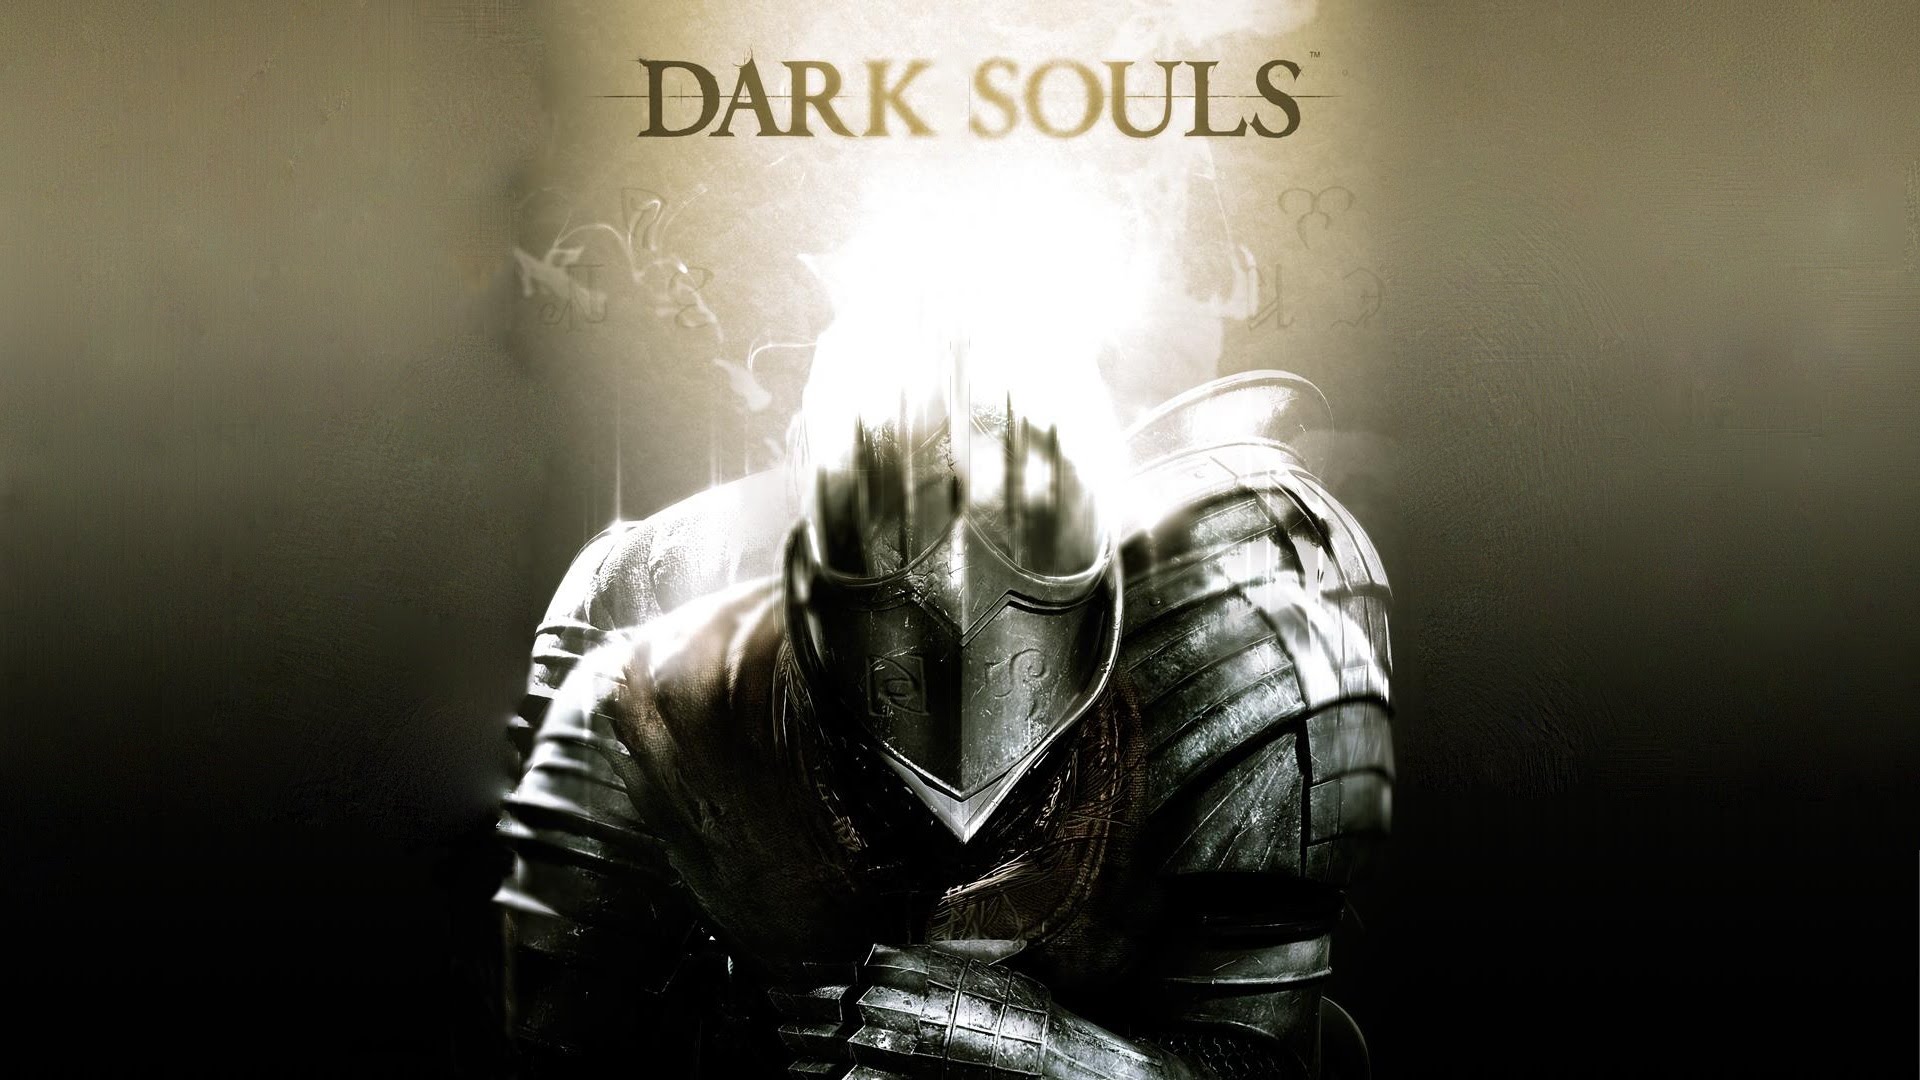 “Dark Souls” and “Tekken Tag Tournament 2” Coming to Xbox One - Out Now, Just in Time for 